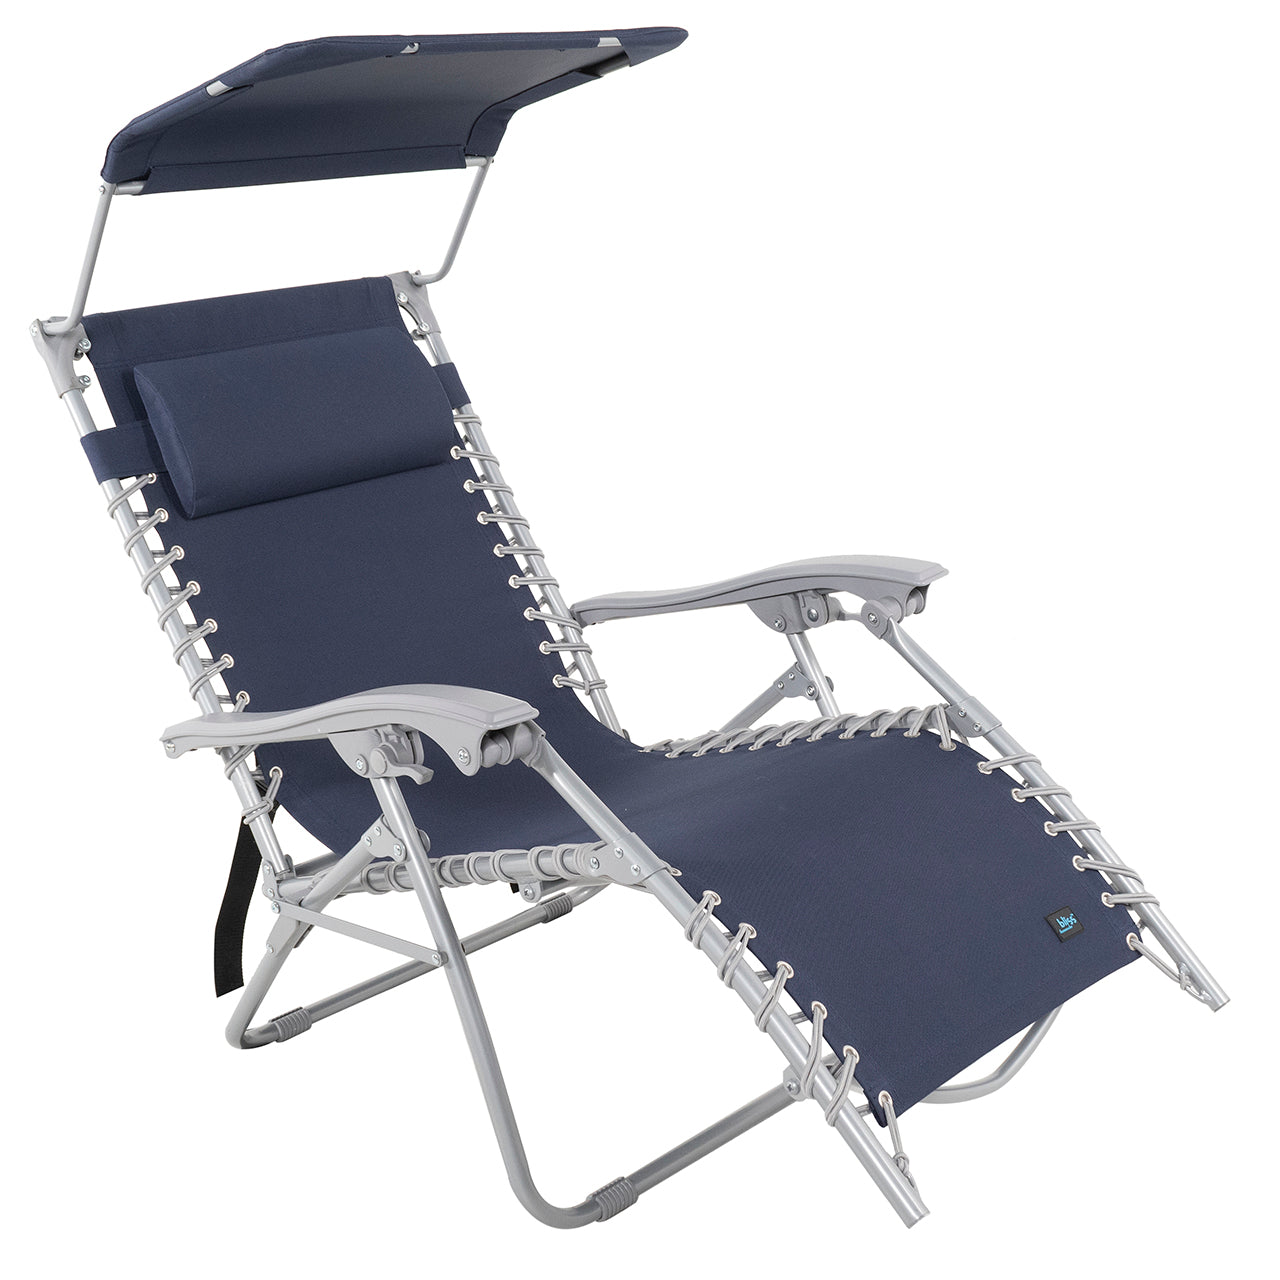 Bliss Hammocks 26-inch Gravity Free Beach Chair with Pillow and Canopy in the dark blue variation.